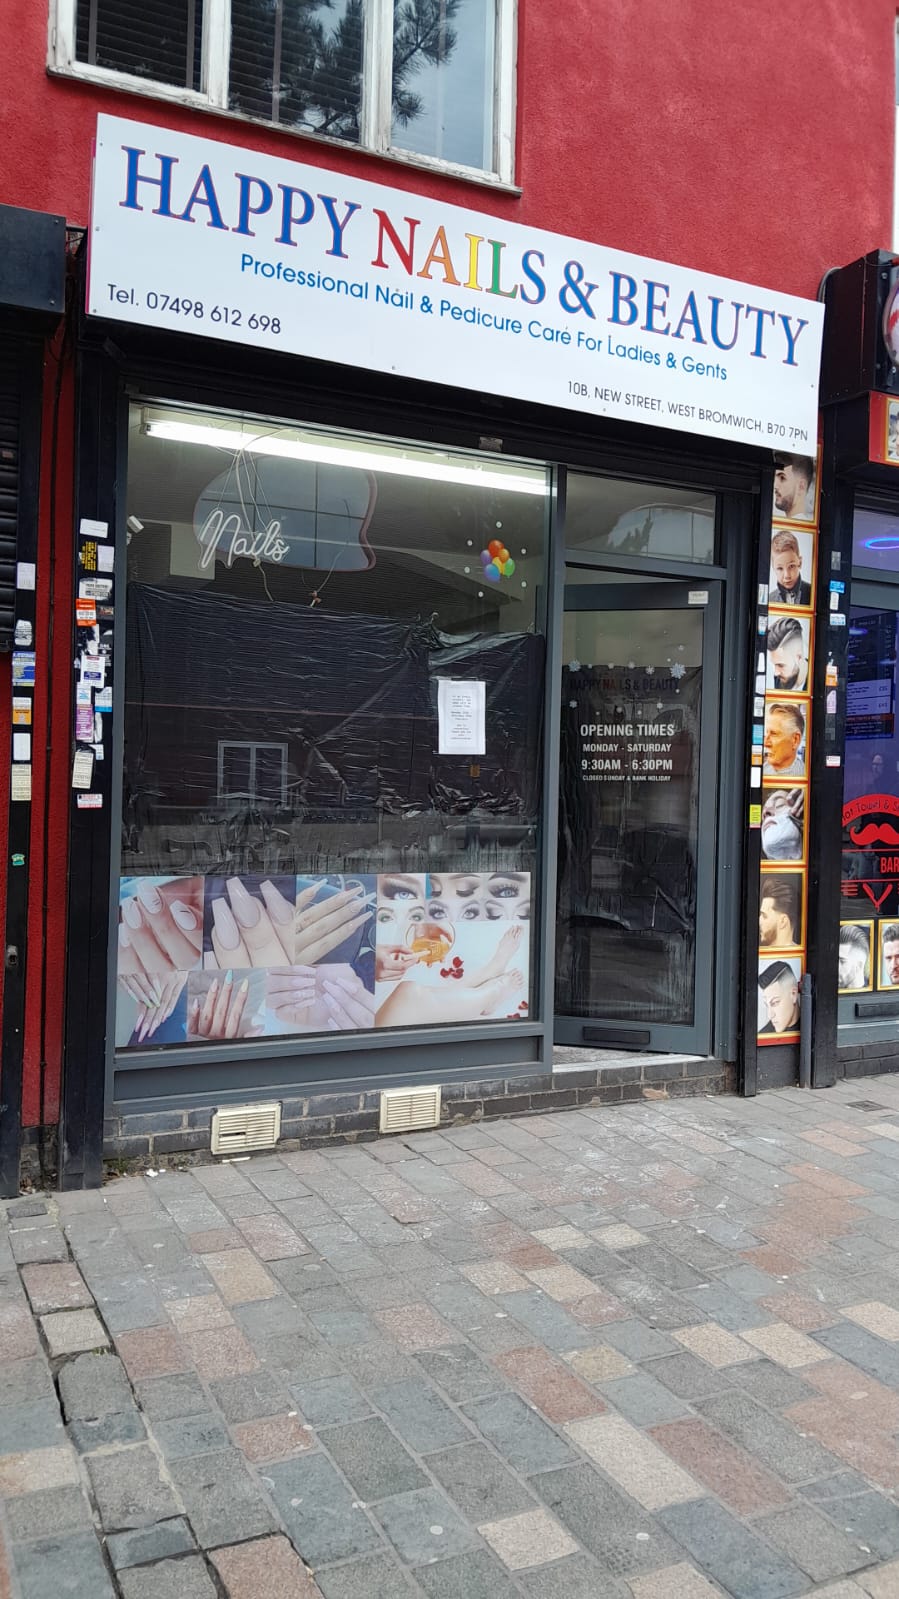 Happy Nails & Beauty located 10B New Street, West Bromwich B70 7PN are going through a renovation and will be closed from until 29th February.